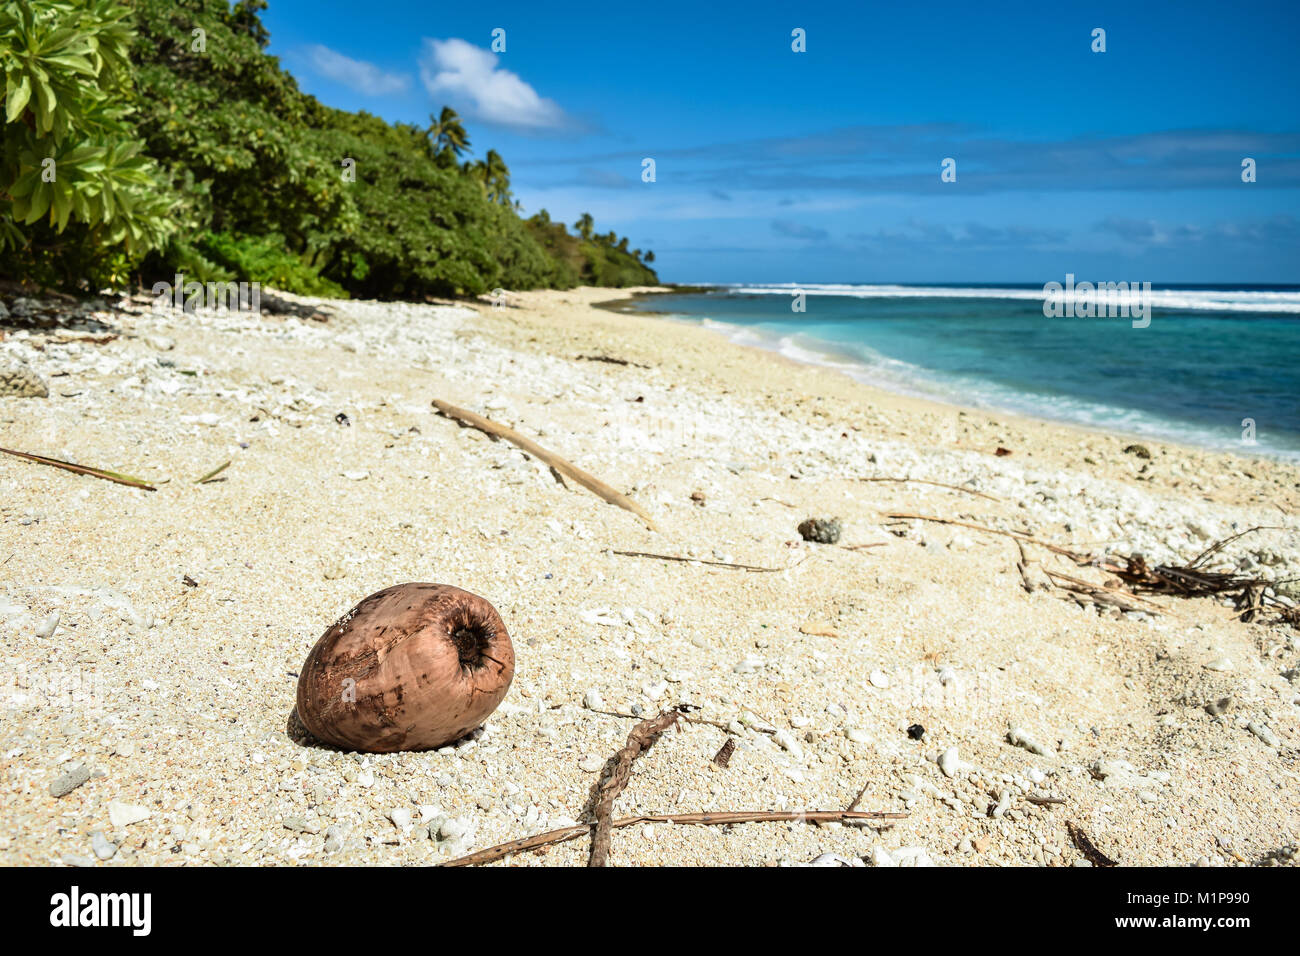 Coconut on a white sand tropical beach with blue sky Stock Photo